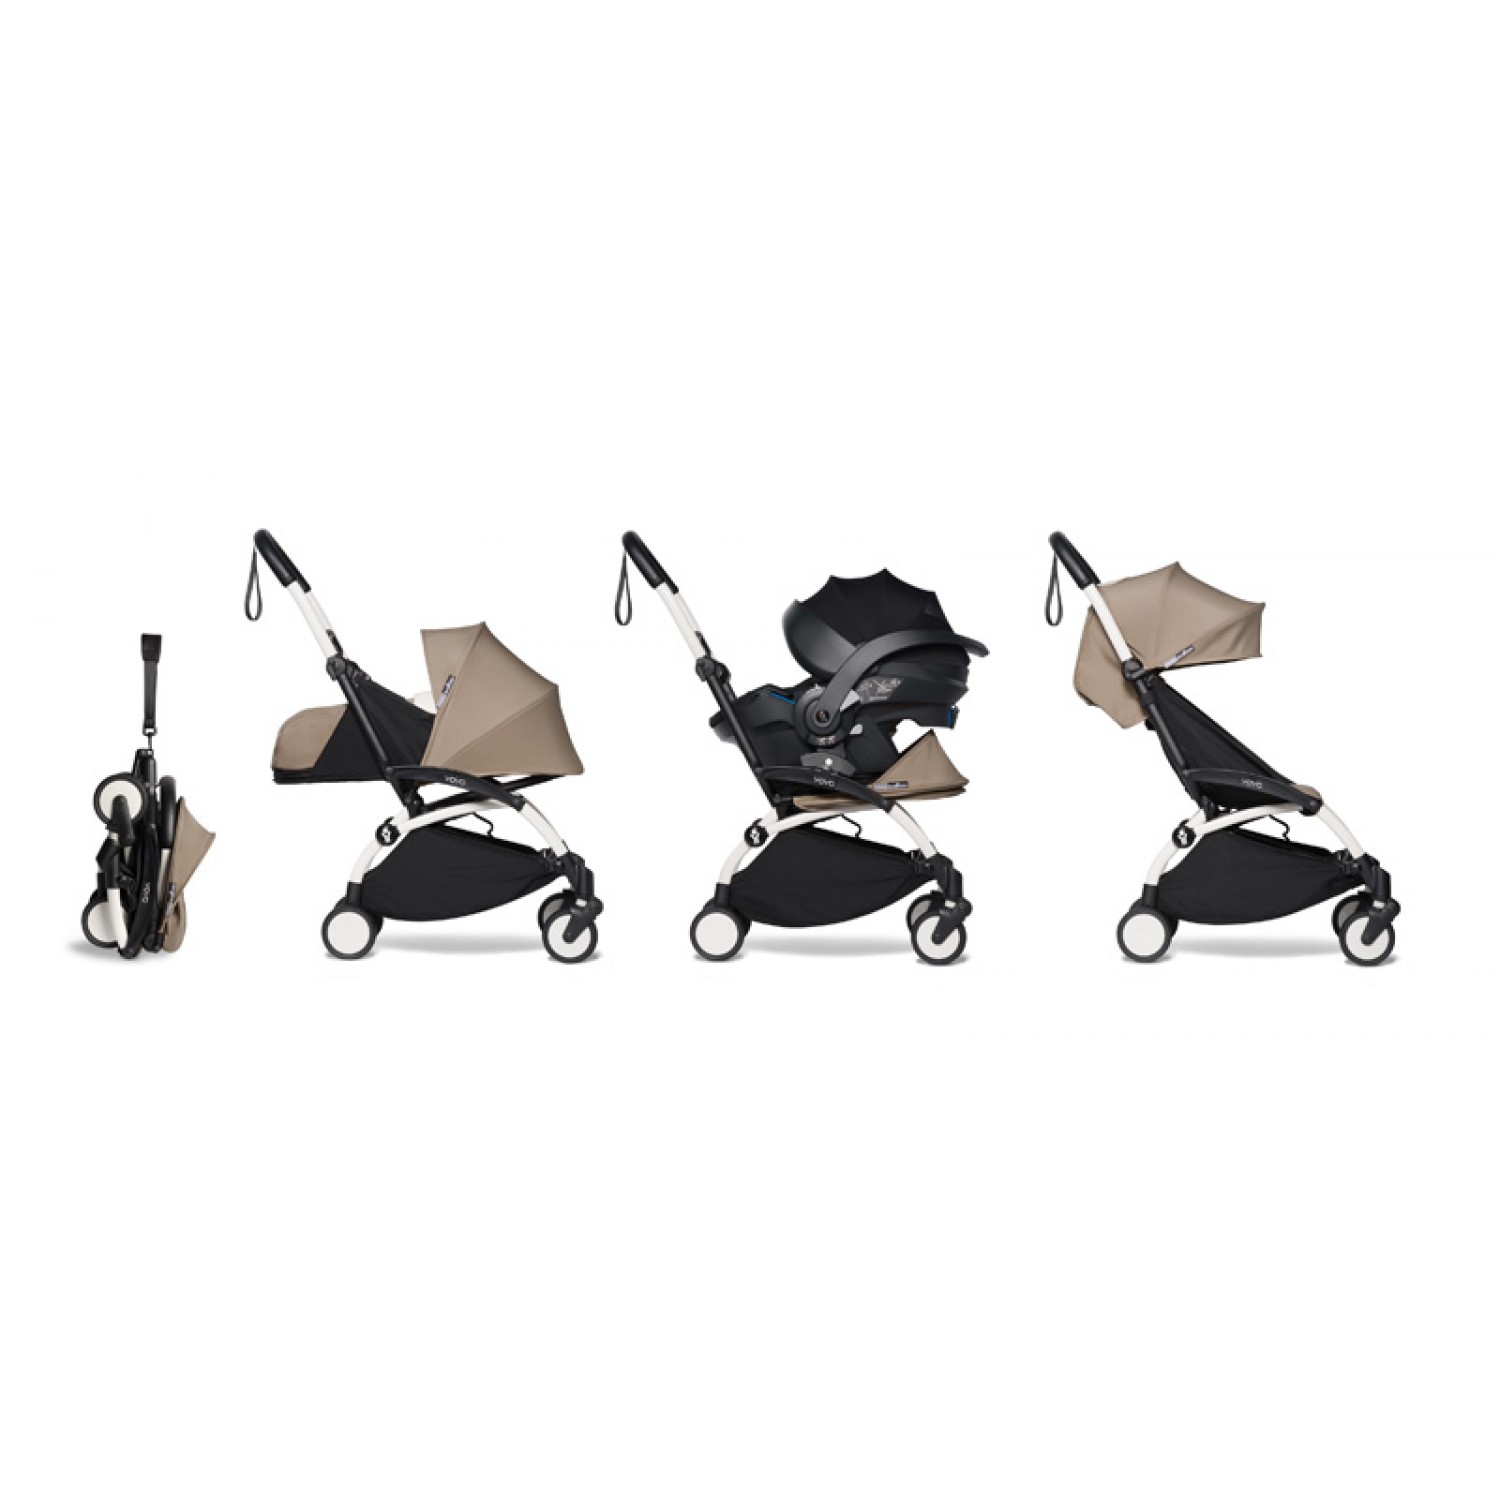 All-in-one BABYZEN stroller YOYO2 0+, car seat and 6+ | White Chassis Taupe